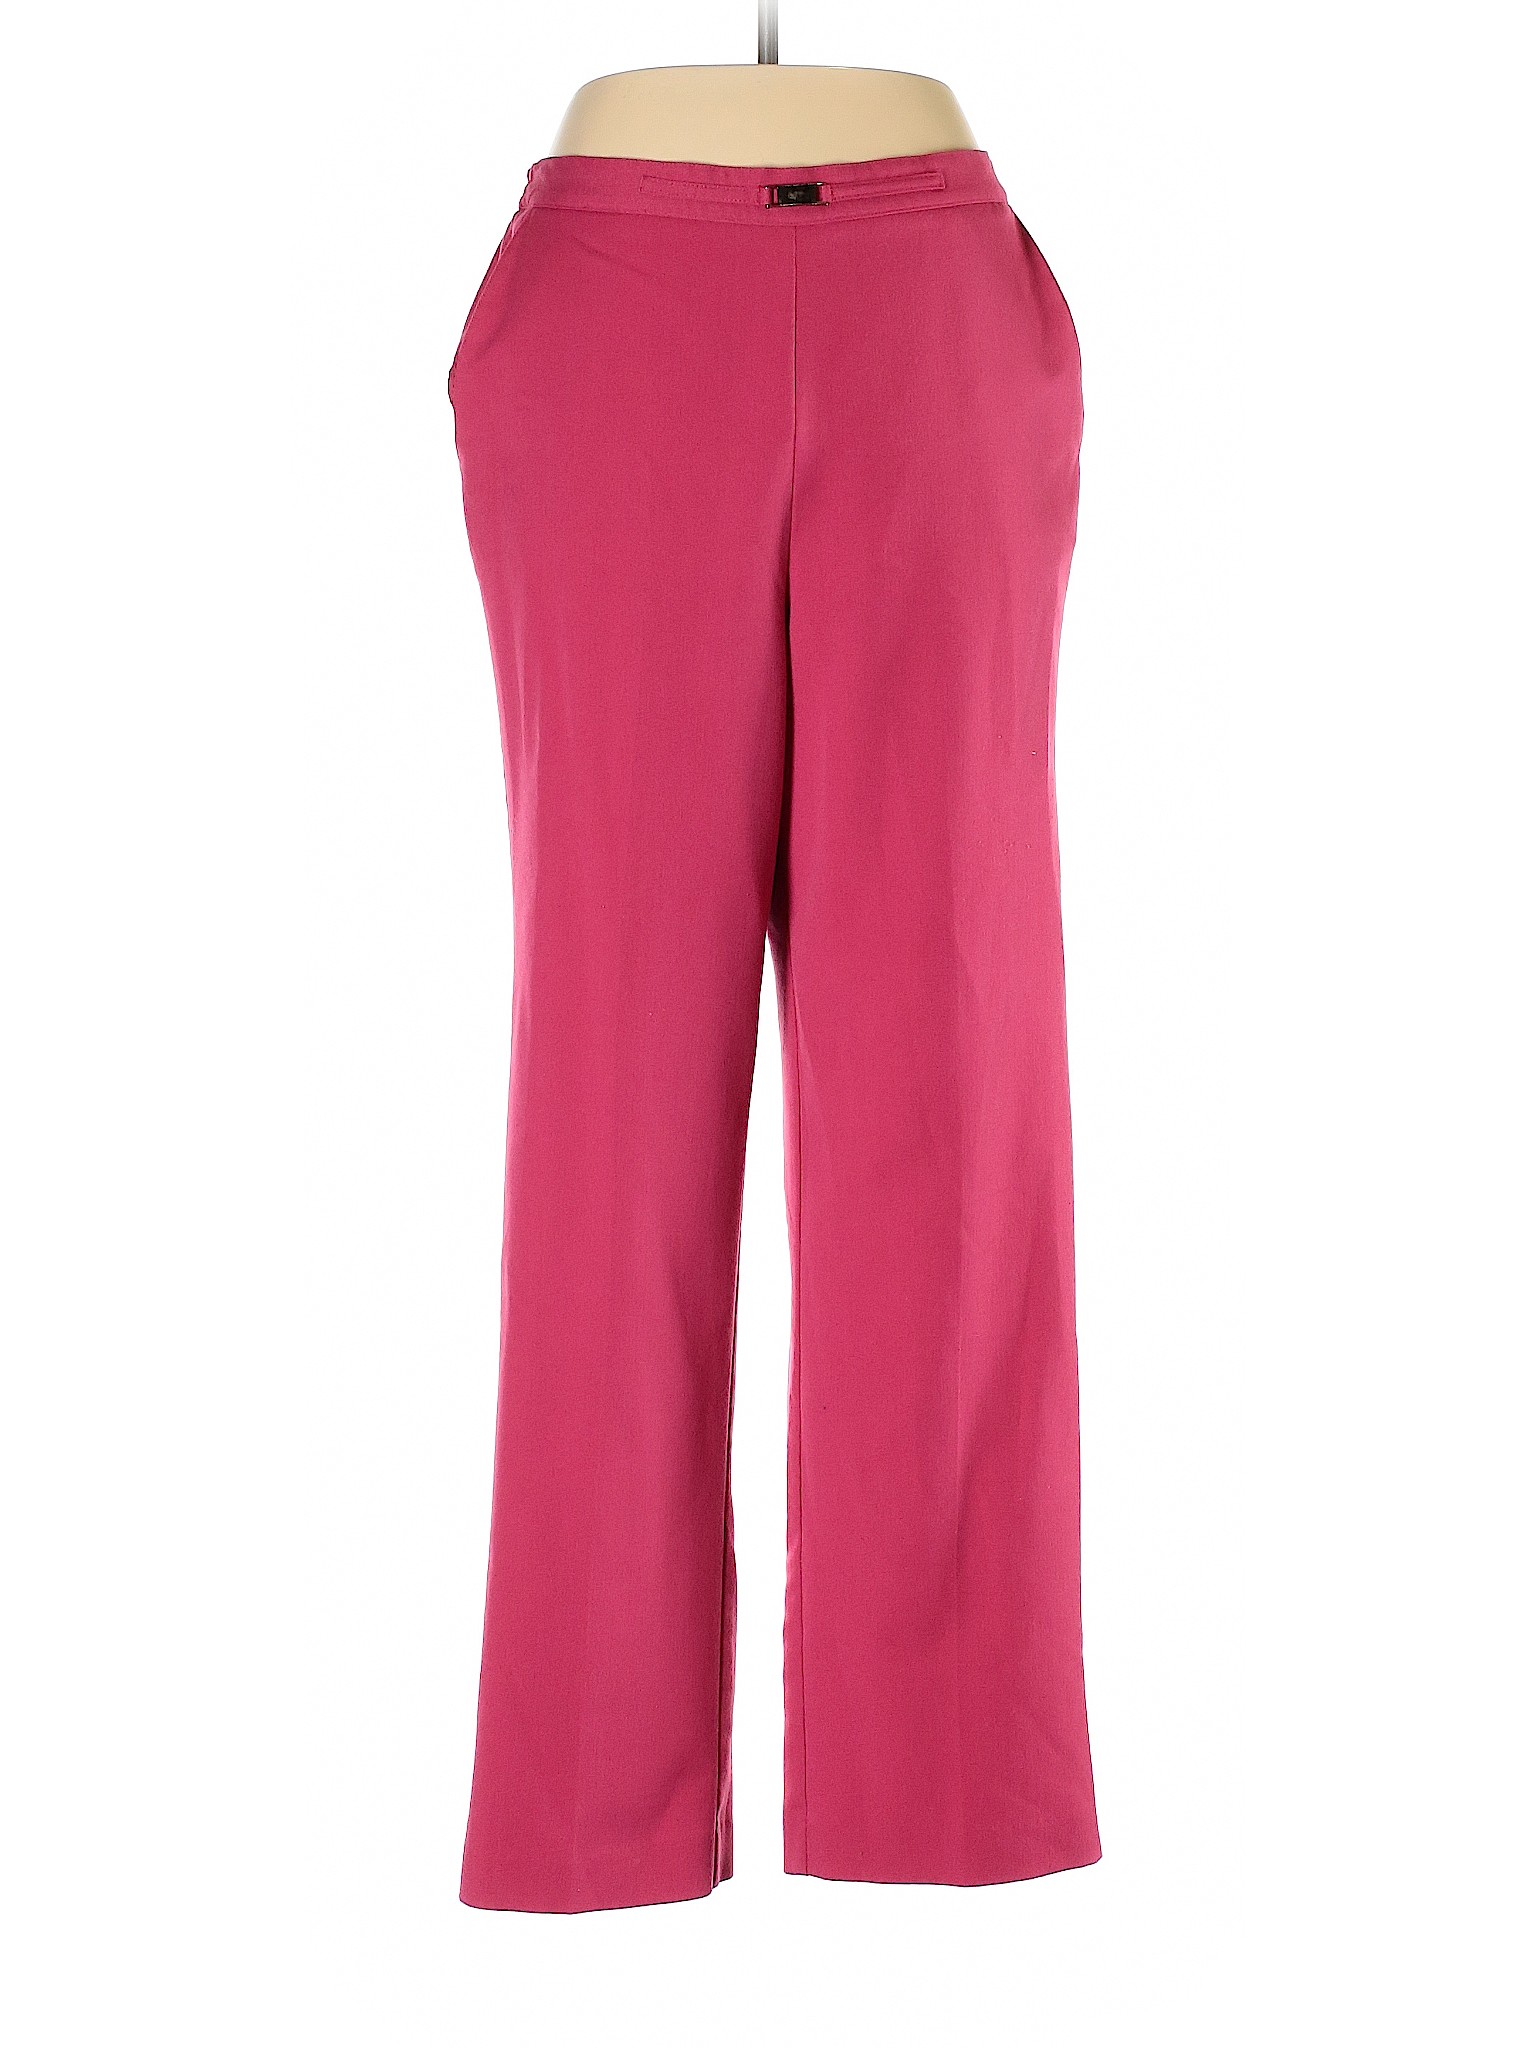 Alfred Dunner Women Pink Casual Pants 10 | eBay